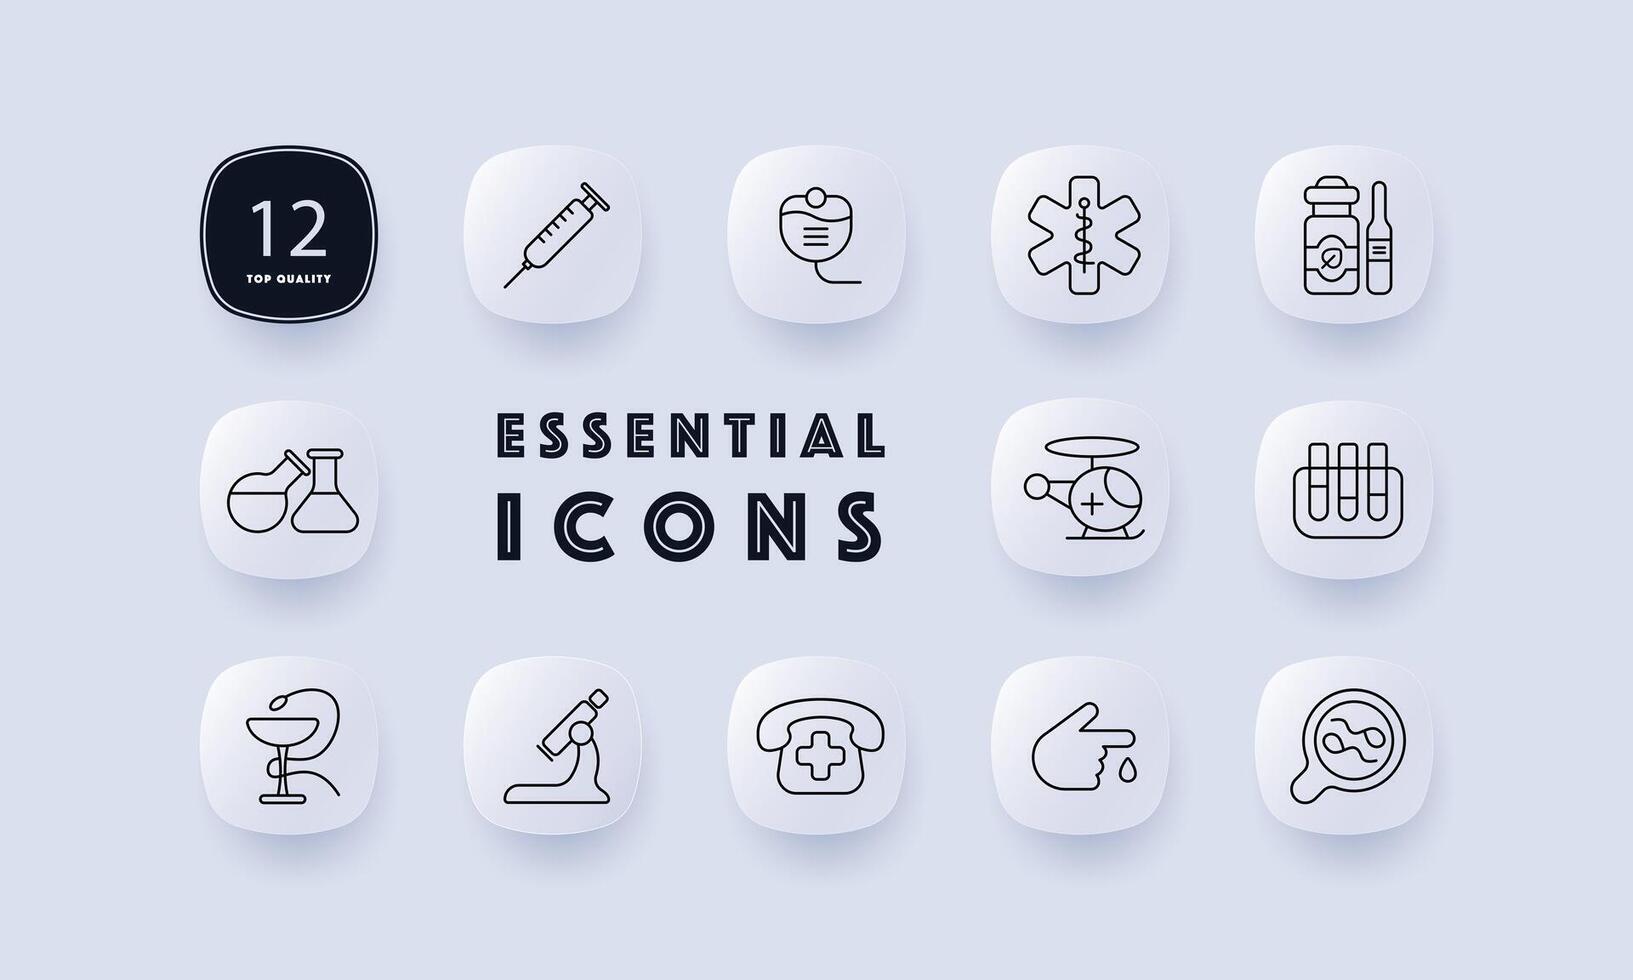 Medical equipment set icon. Glass, snake, goblet, telephone, cross, call an ambulance, microscope, magnifying glass, flask, container, dropper, health care. Medical care concept. Neomorphism style. vector